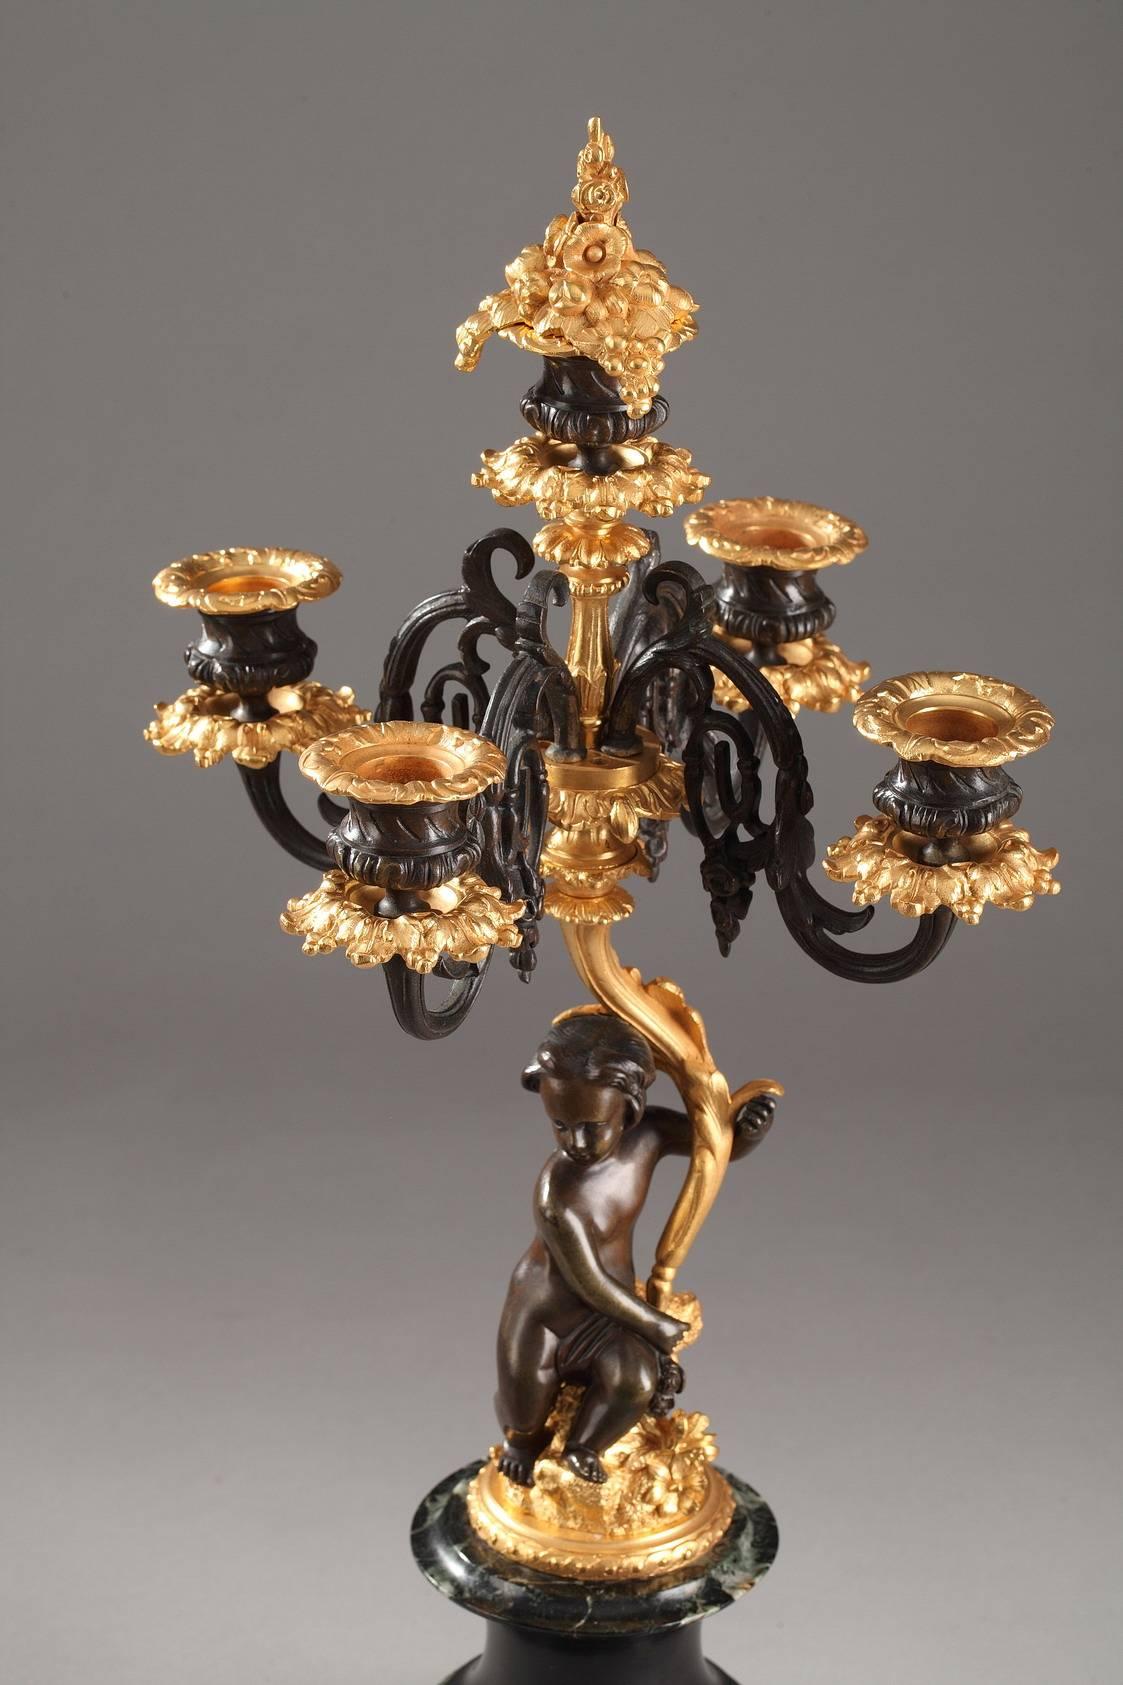 Pair of gilt and patinated bronze candelabras. Each Rocaille-inspired candelabra is ornamented with a putto seated on a rock and holds the stem of the candelabra in his raised arm. The gilded, curved stem raises to support five branches that are